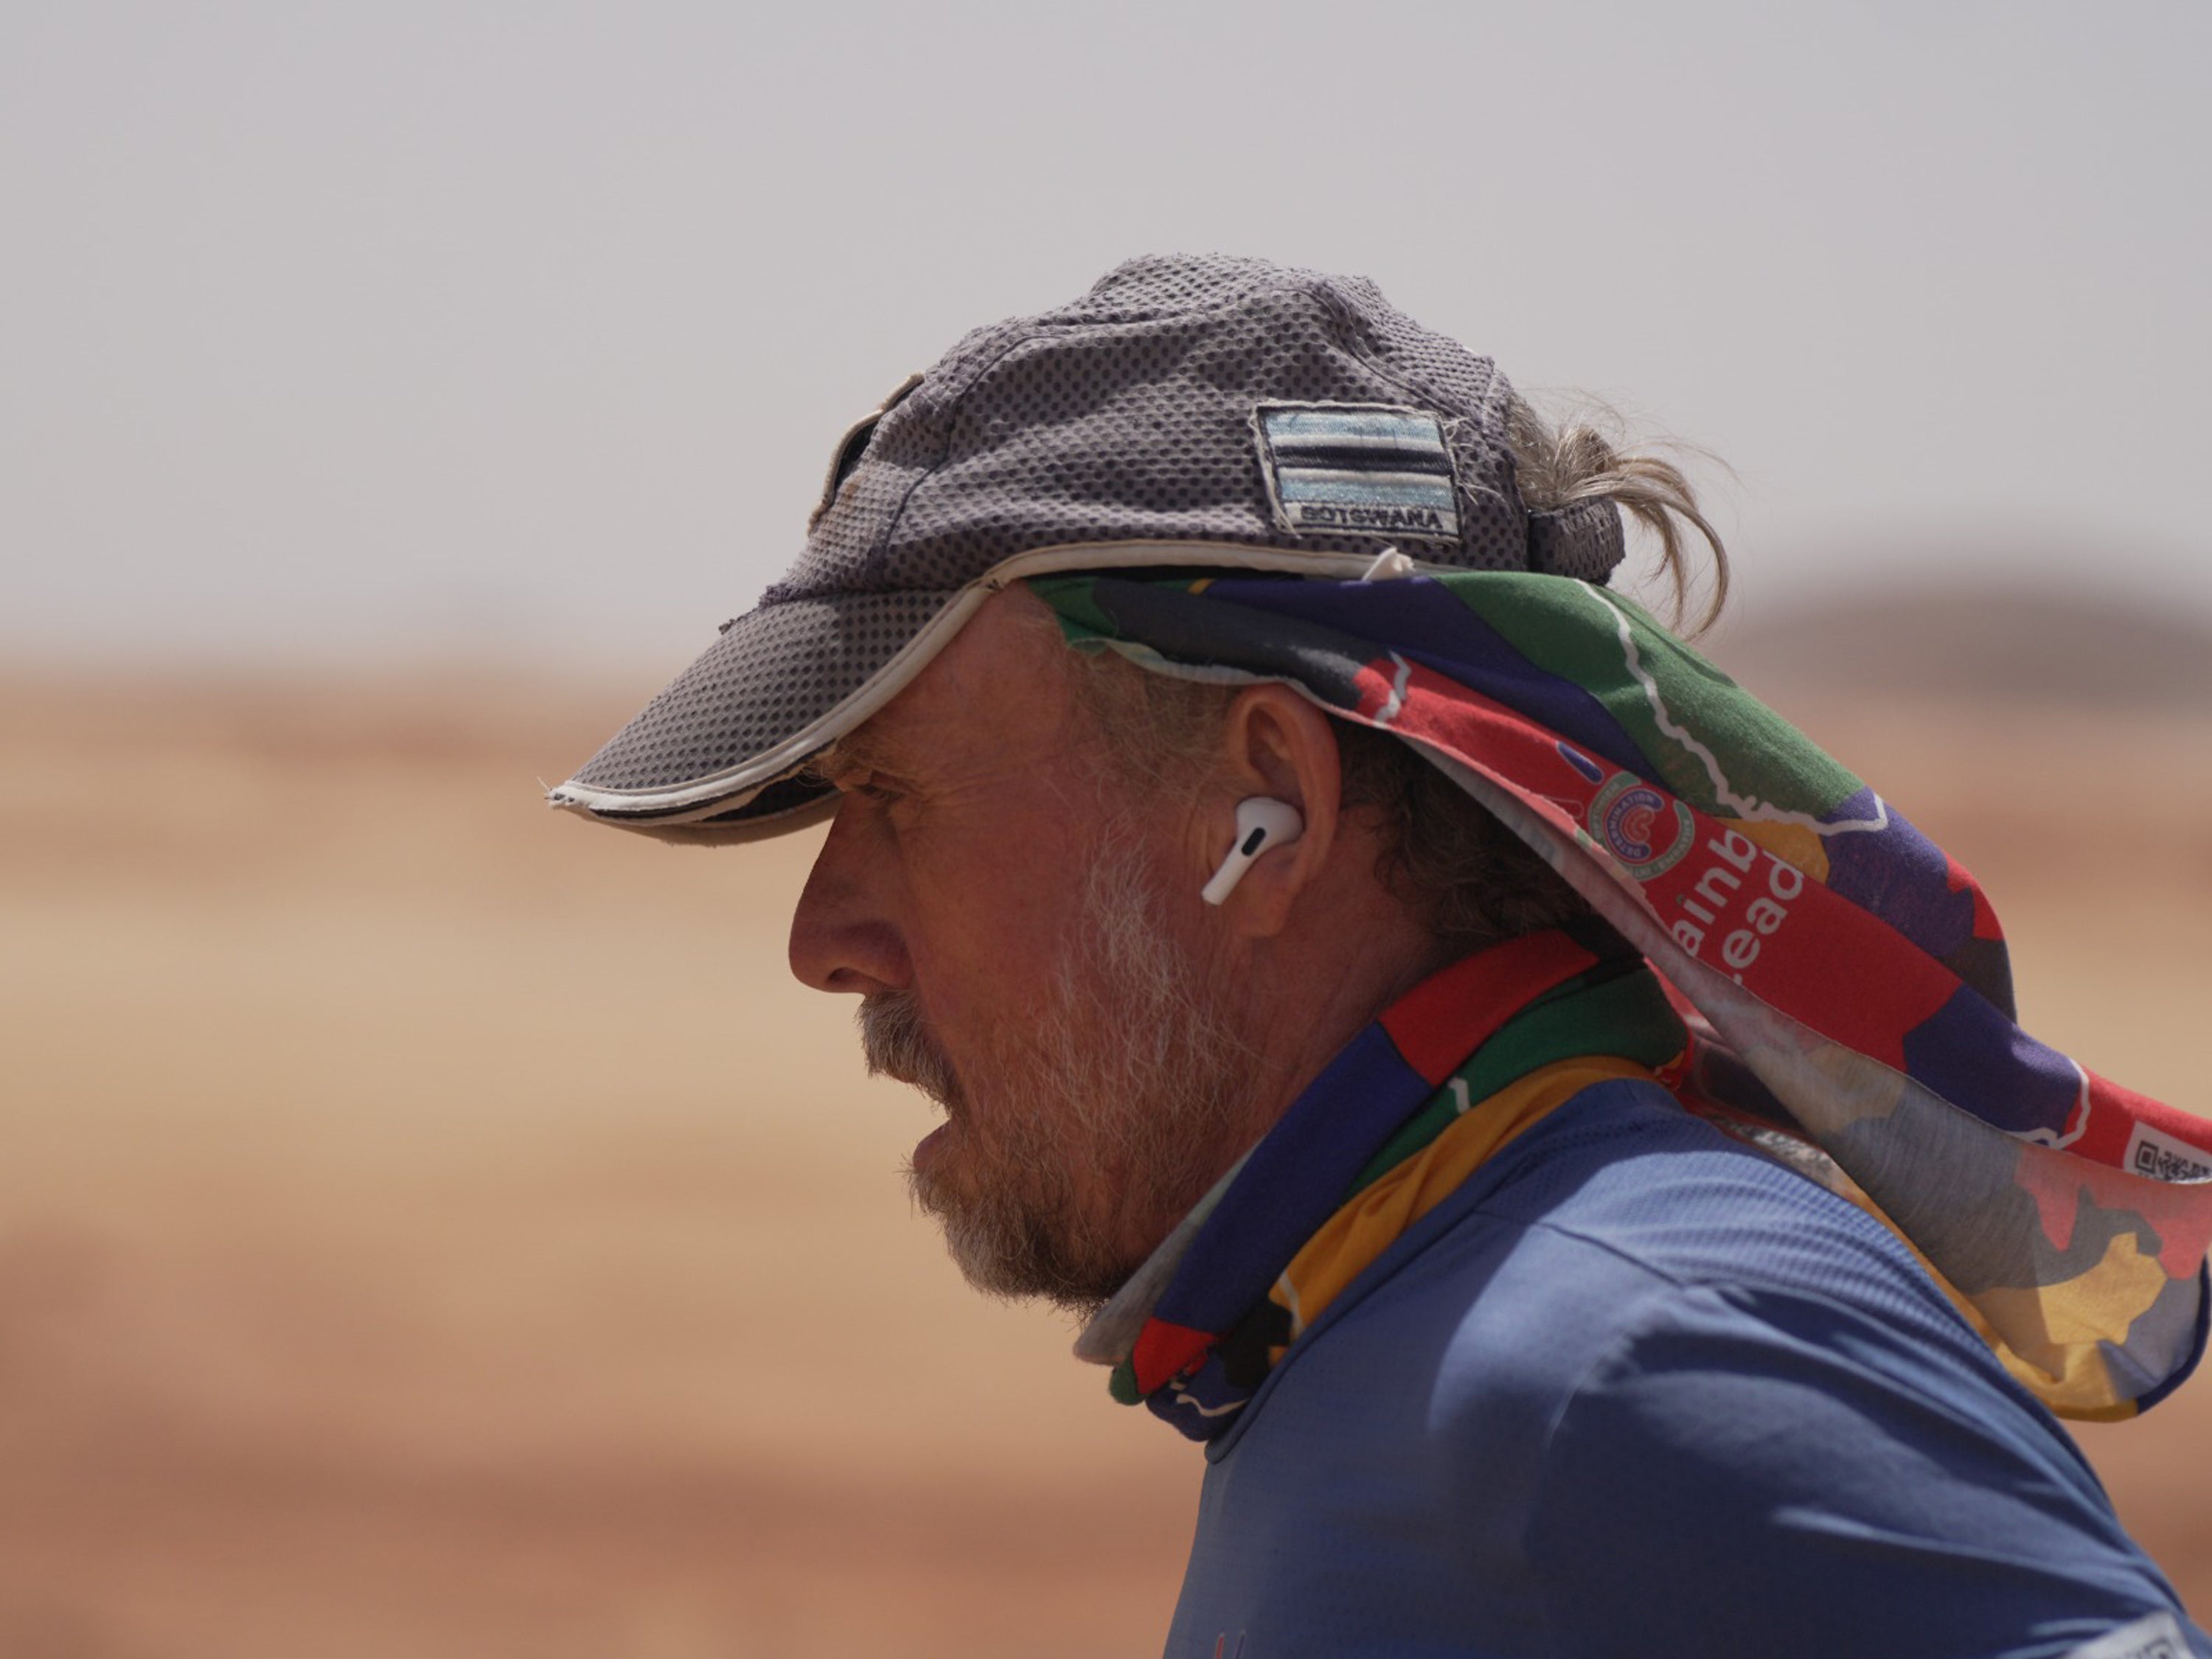 Keith Boyd who aiming to beat the Guinness World Record (GWR) for the fastest person to run the length of Africa